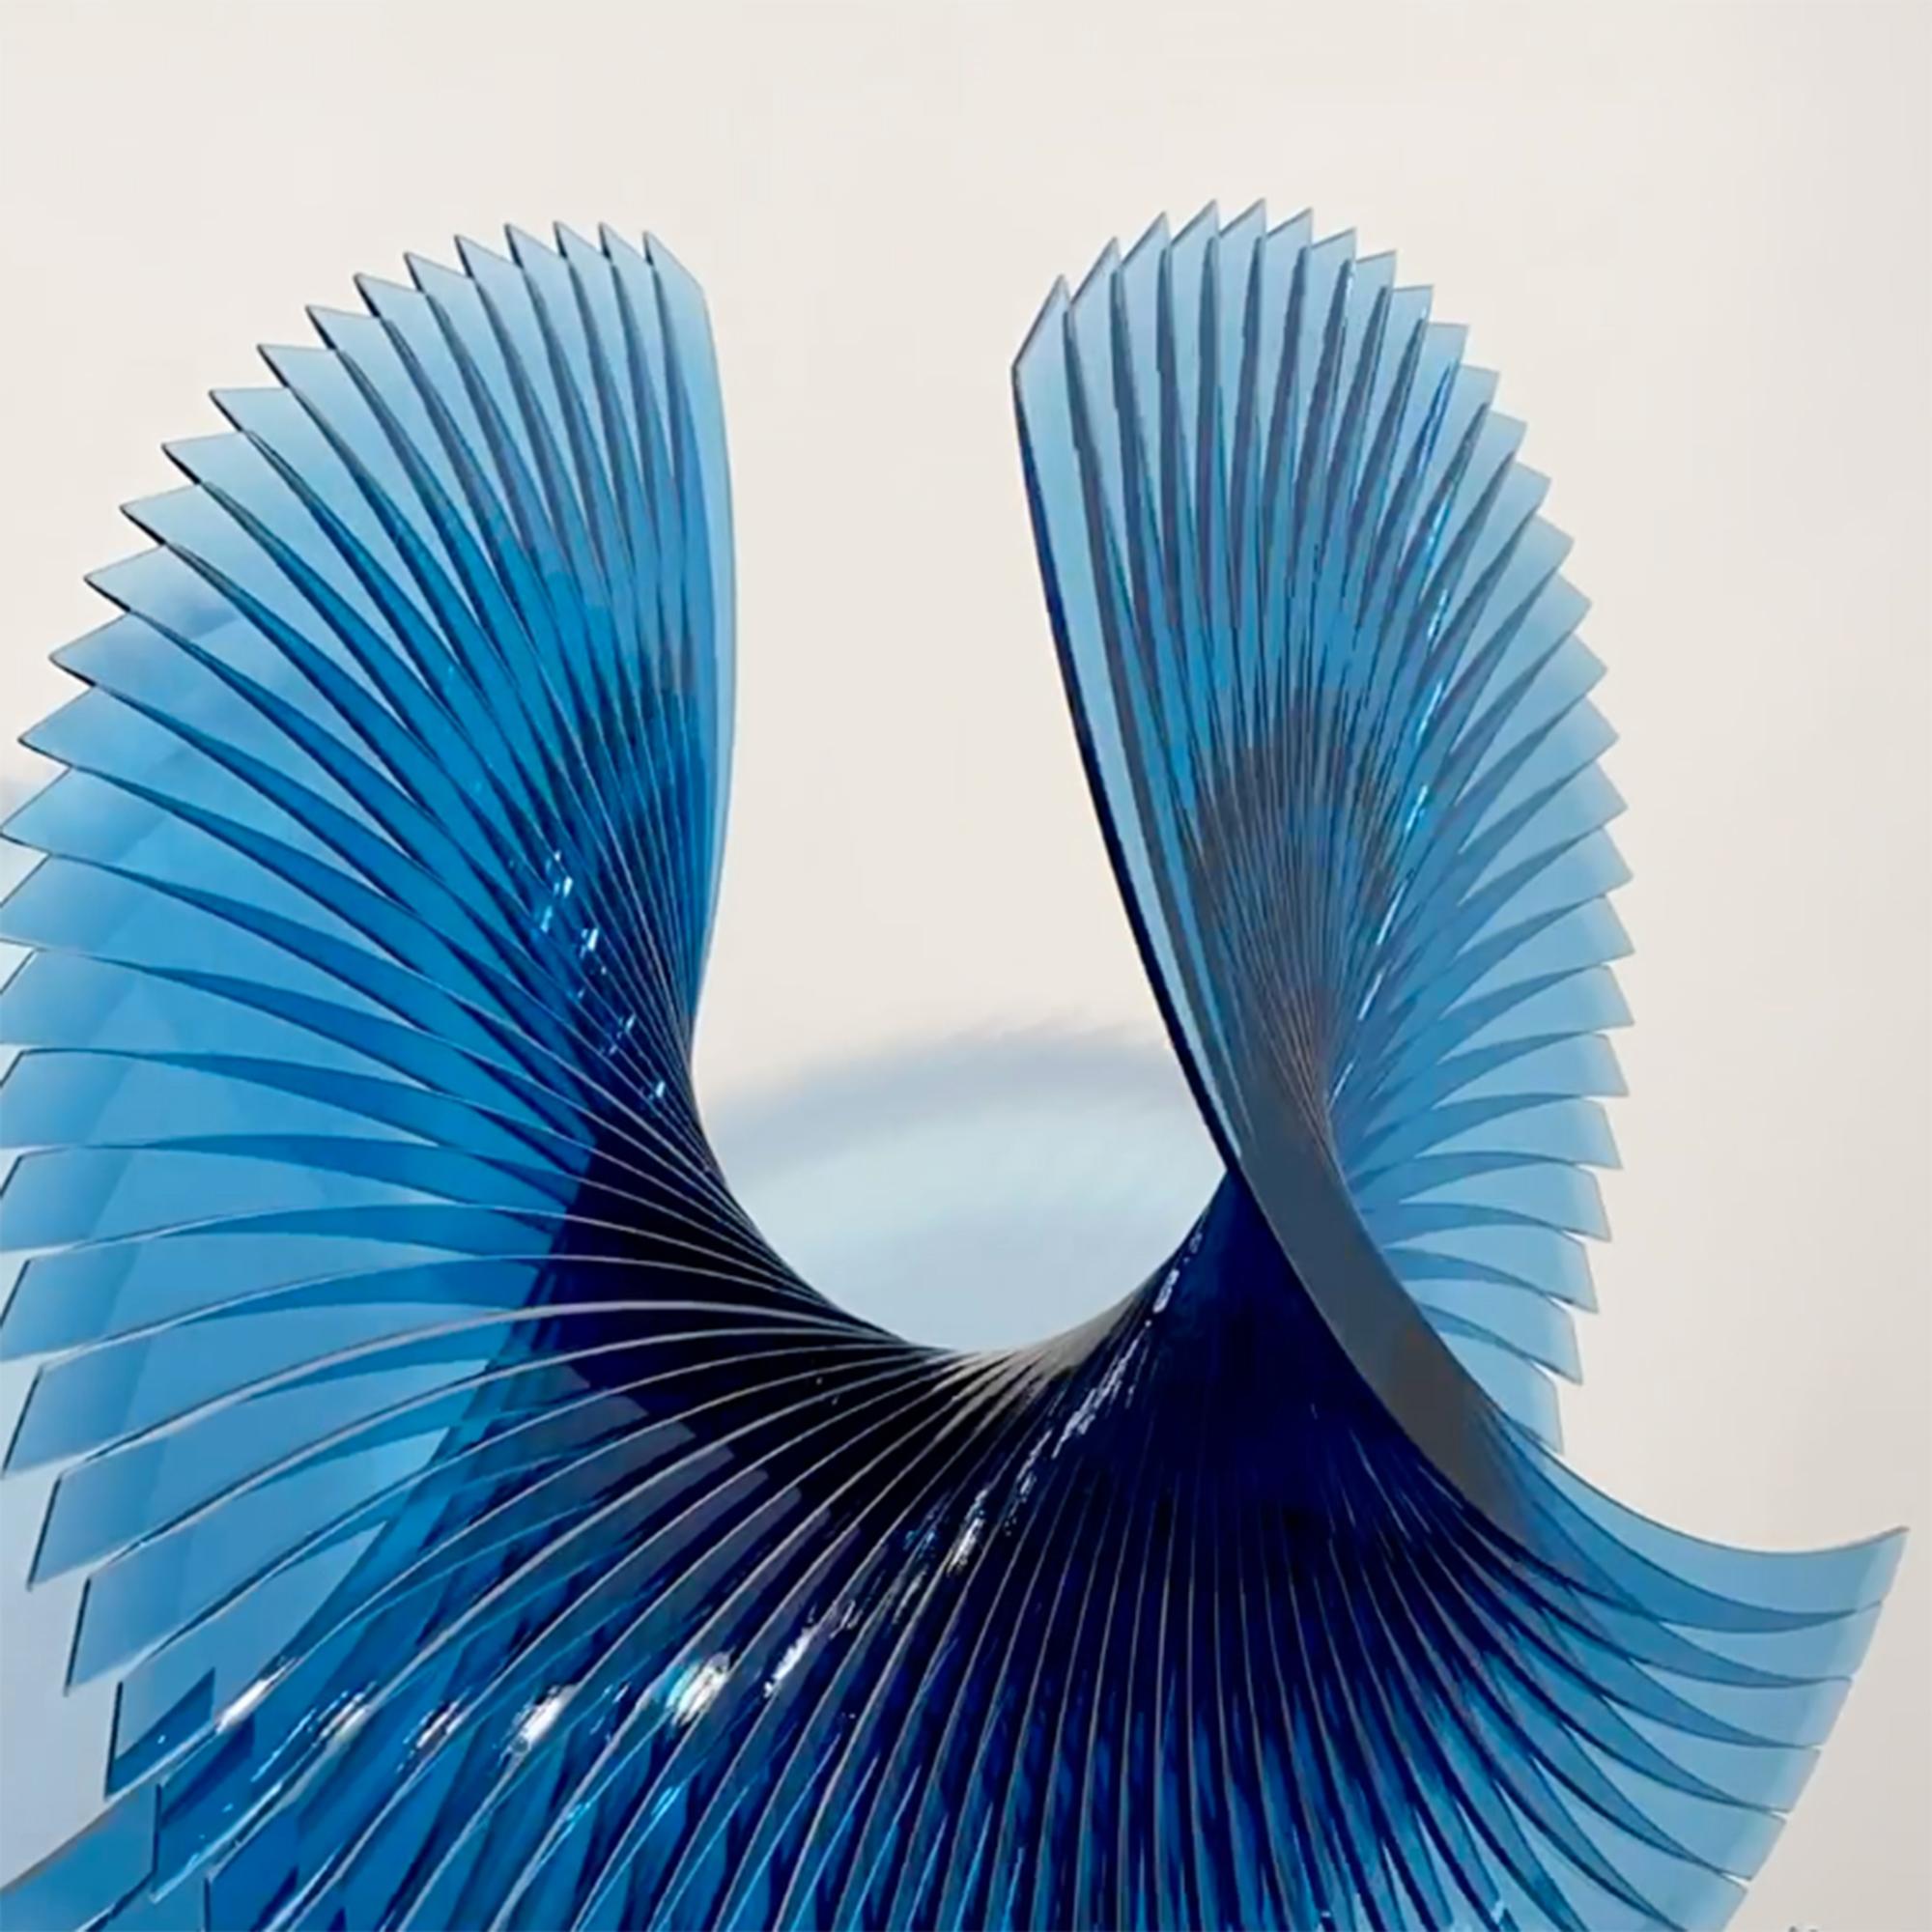 'Almost a Tear in Pacifica' Abstract Glass Sculpture - Blue Abstract Sculpture by Tom Marosz